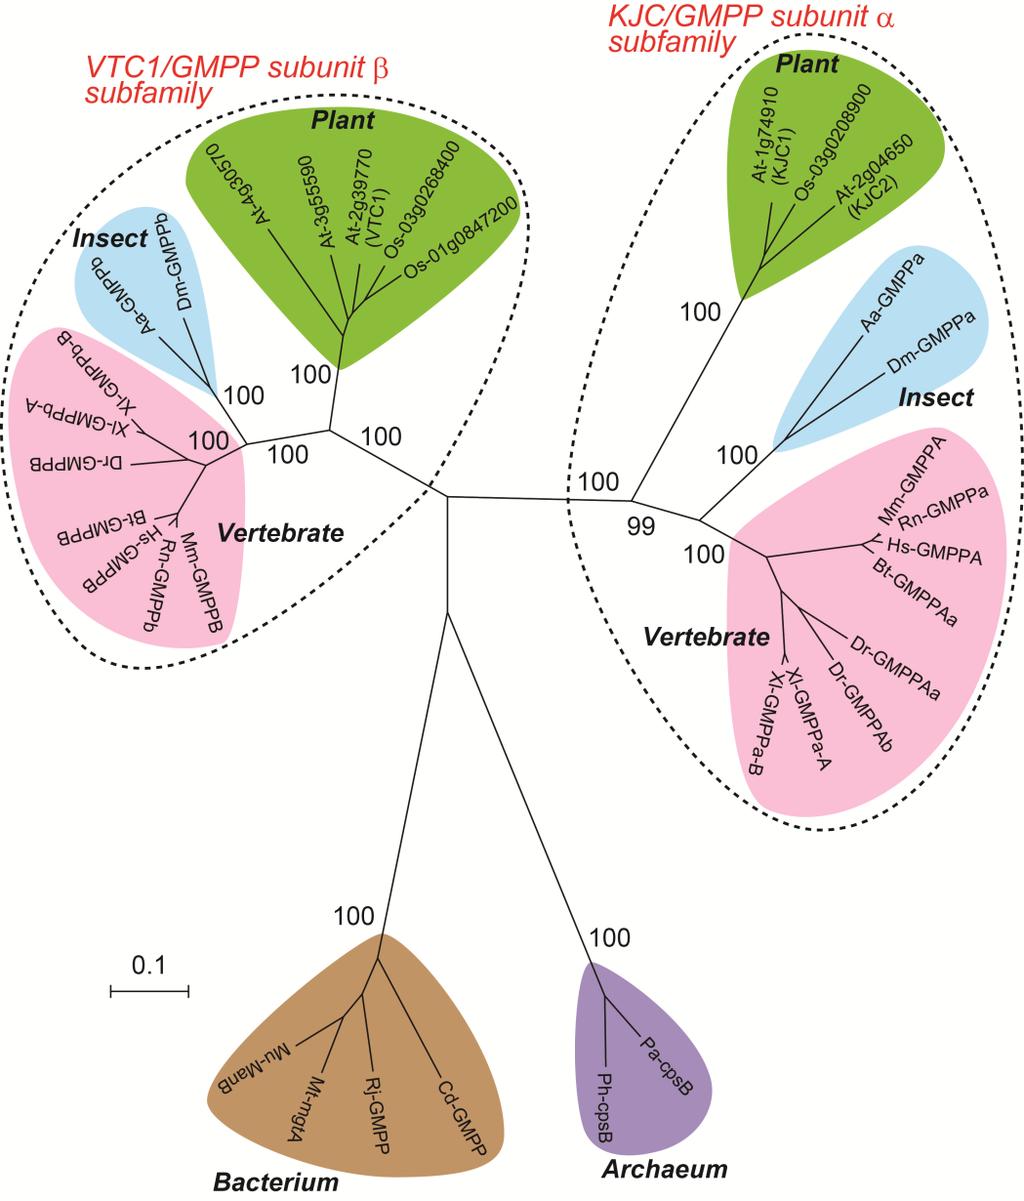 Supplemental Figure 12. KJC/GMPP subunit and VTC1/GMPP subunit subfamilies. The phylogenetic relationships were analyzed using MEGA software (version 6.).